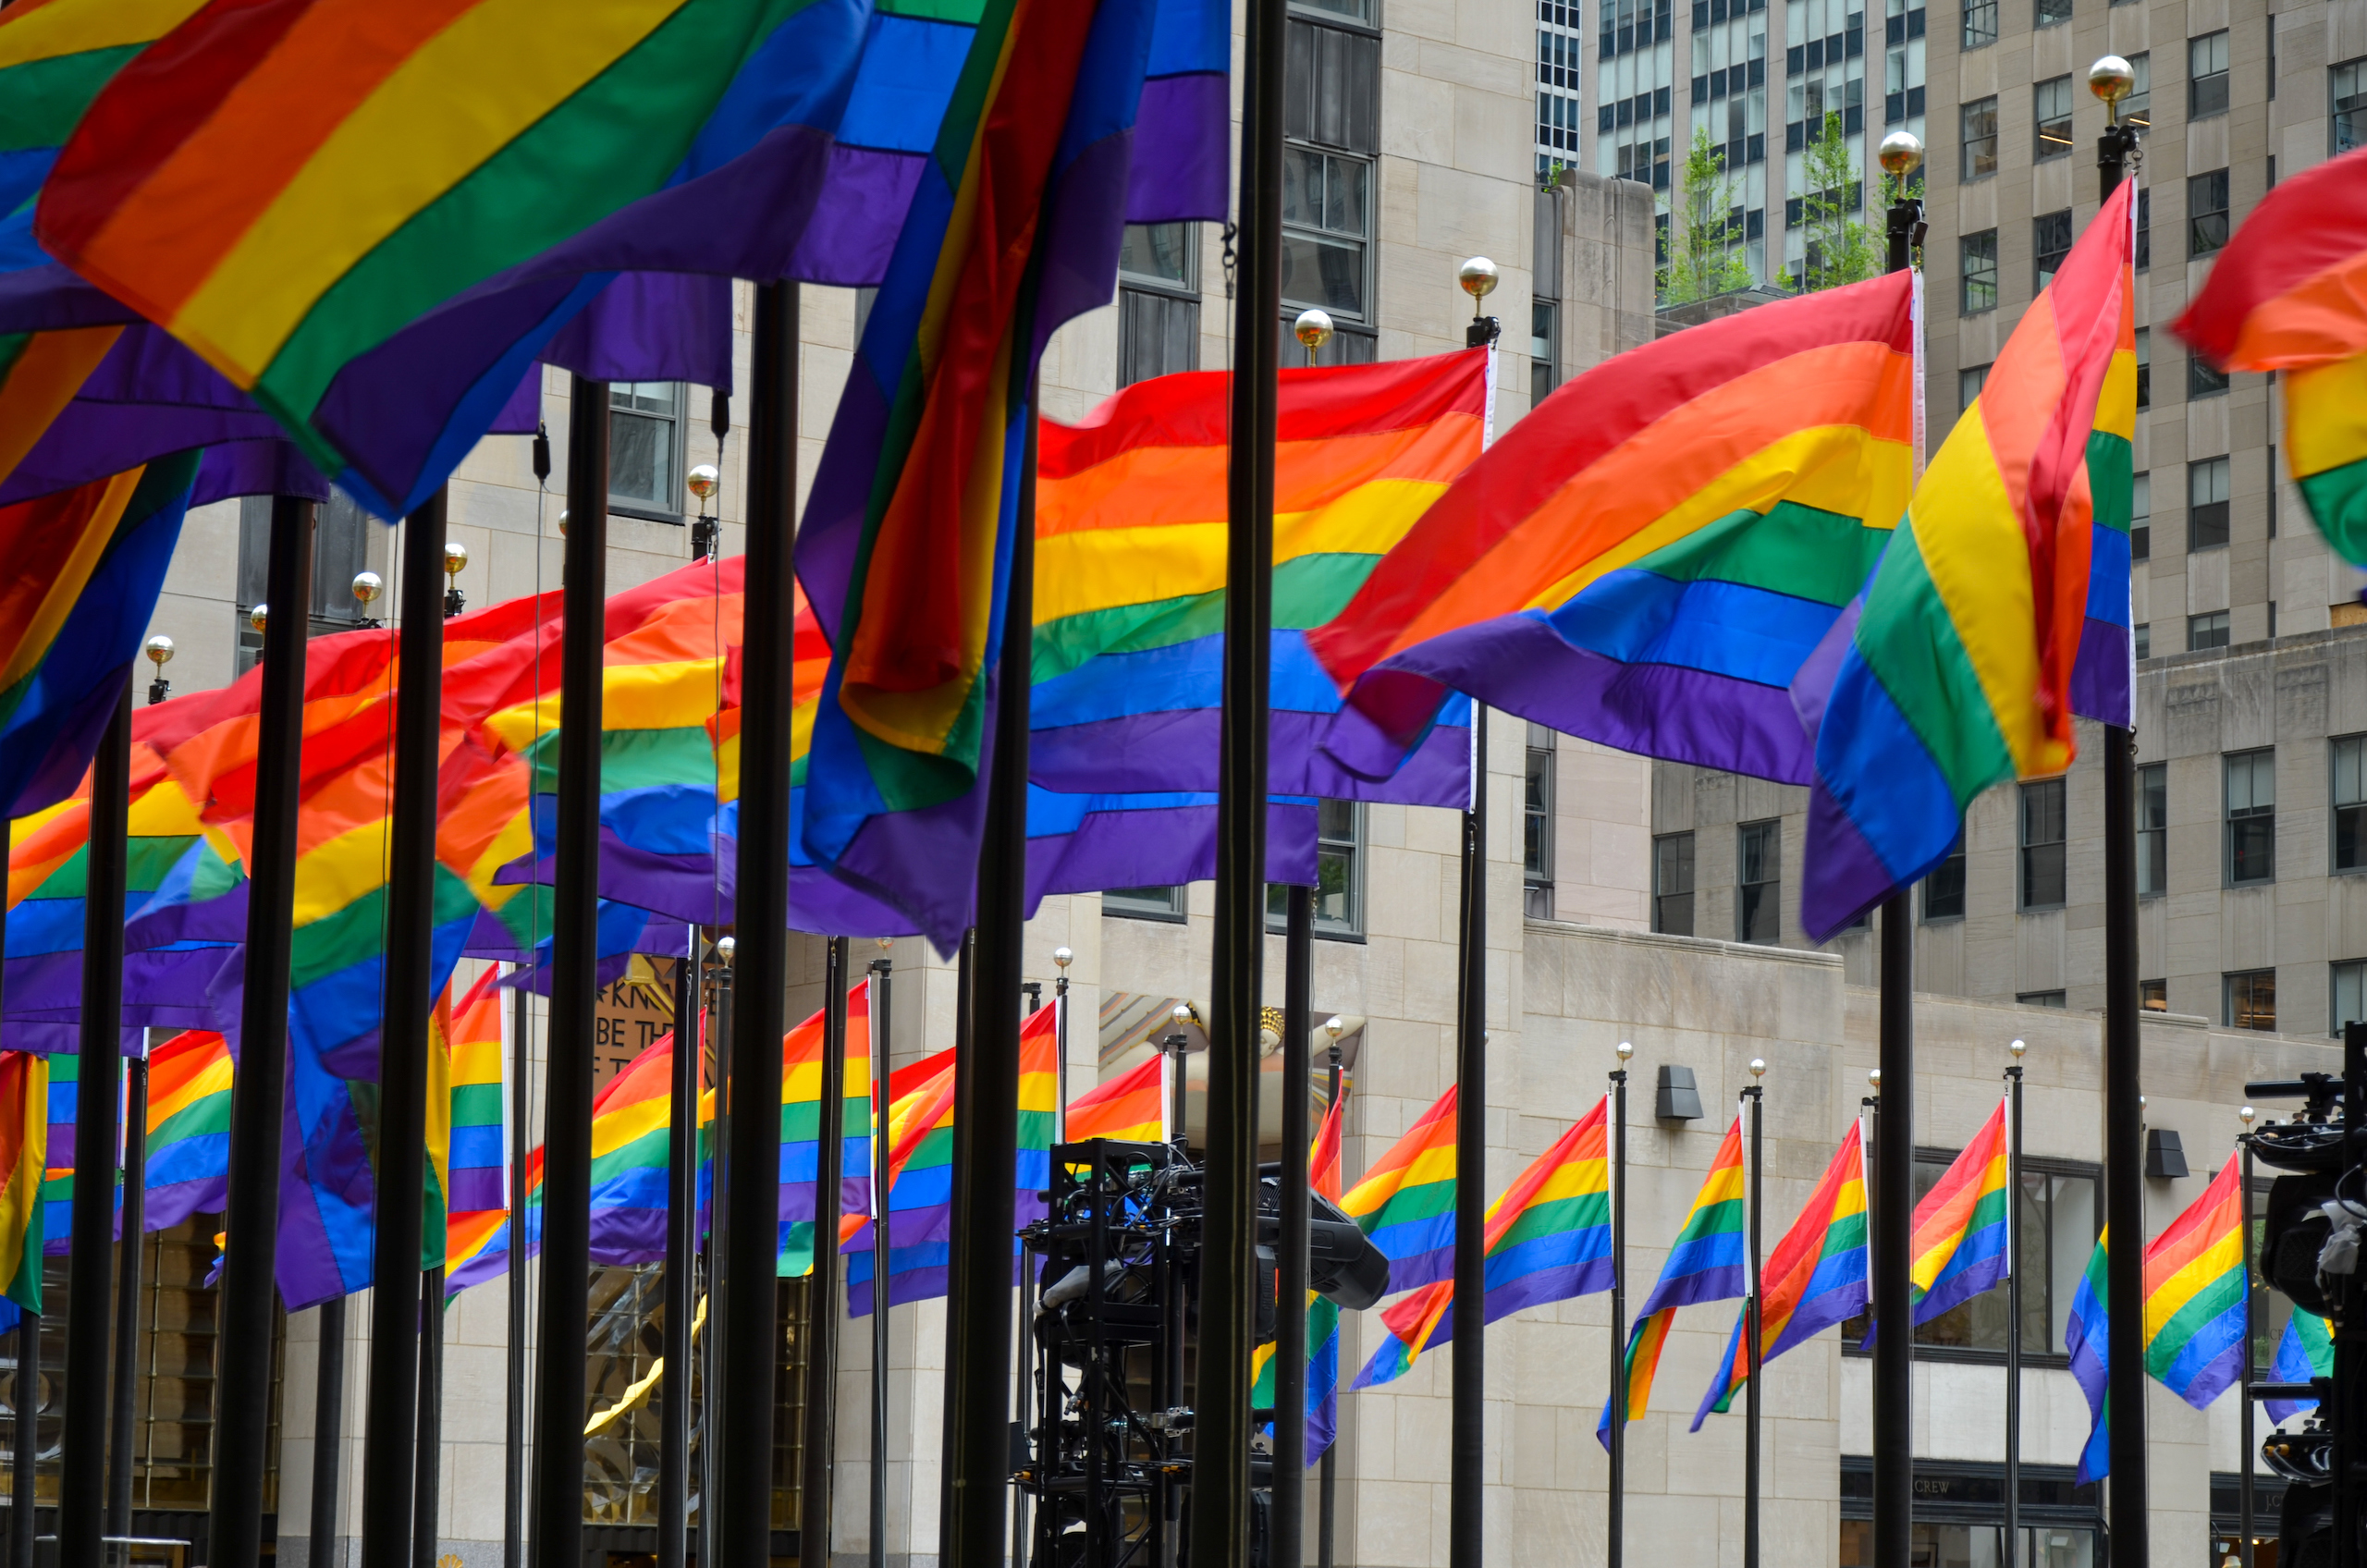 Rockefeller Plaza in New York City is seen covered with Pride flags during the Pride month on June 11, 2022.